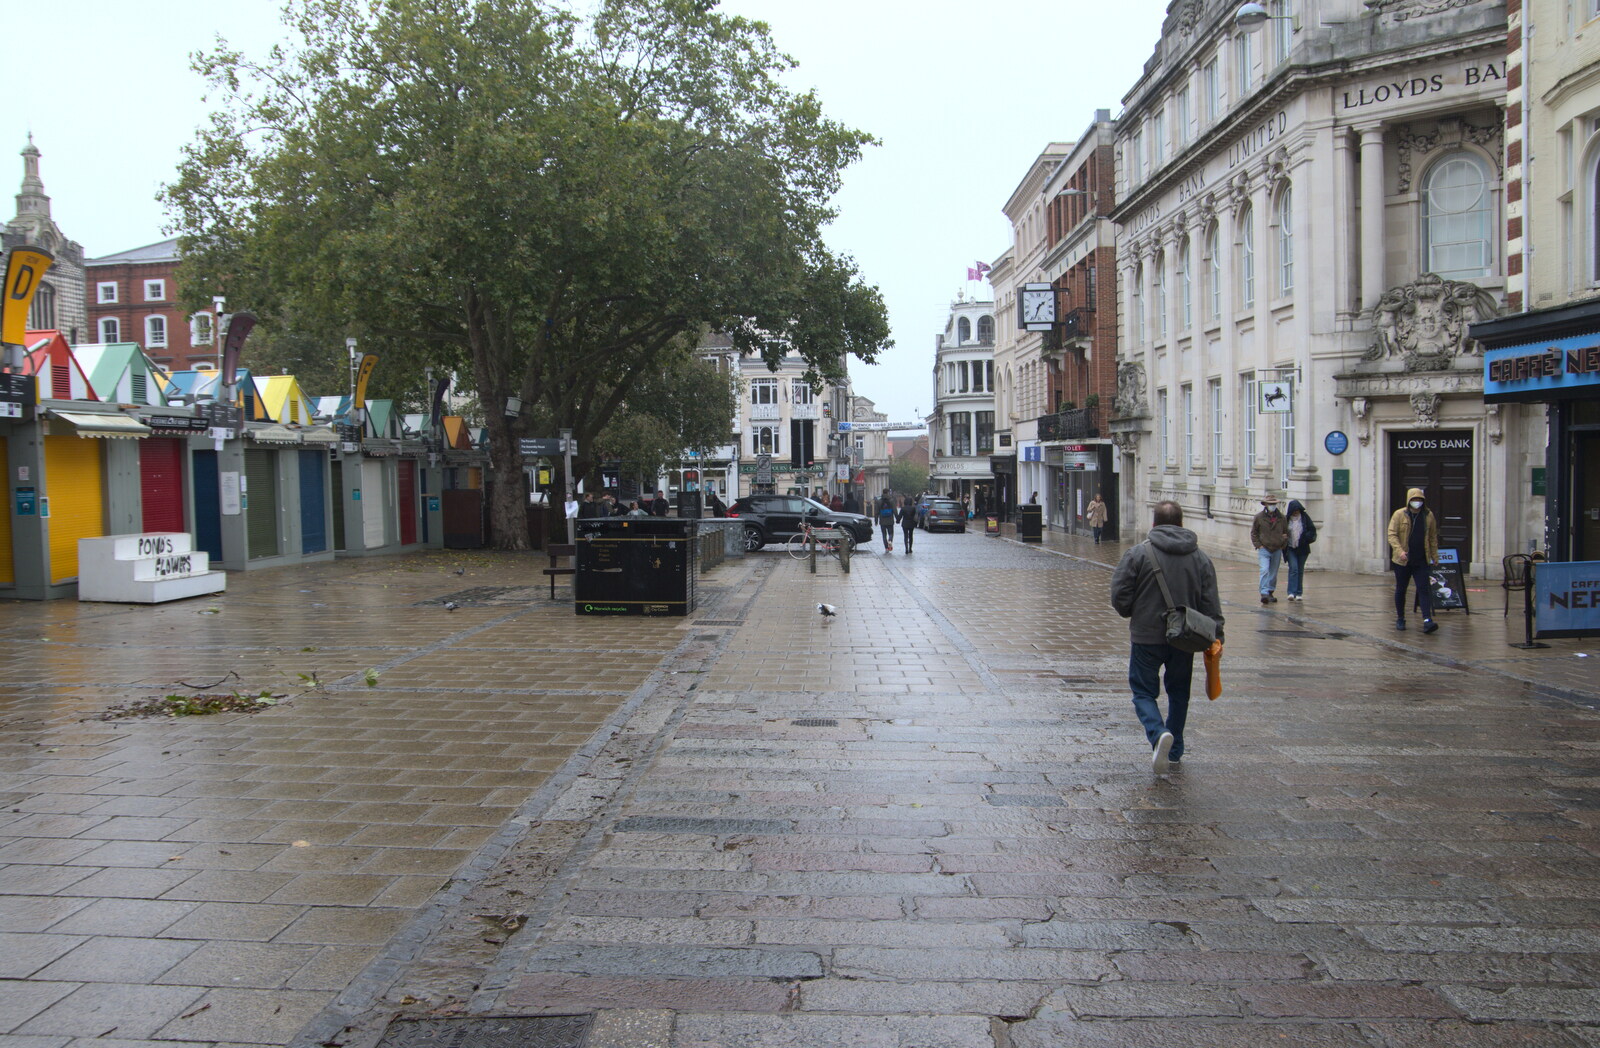 An almost-empty Gentleman's Walk from A Trip to Norwich, Norfolk - 27th September 2020